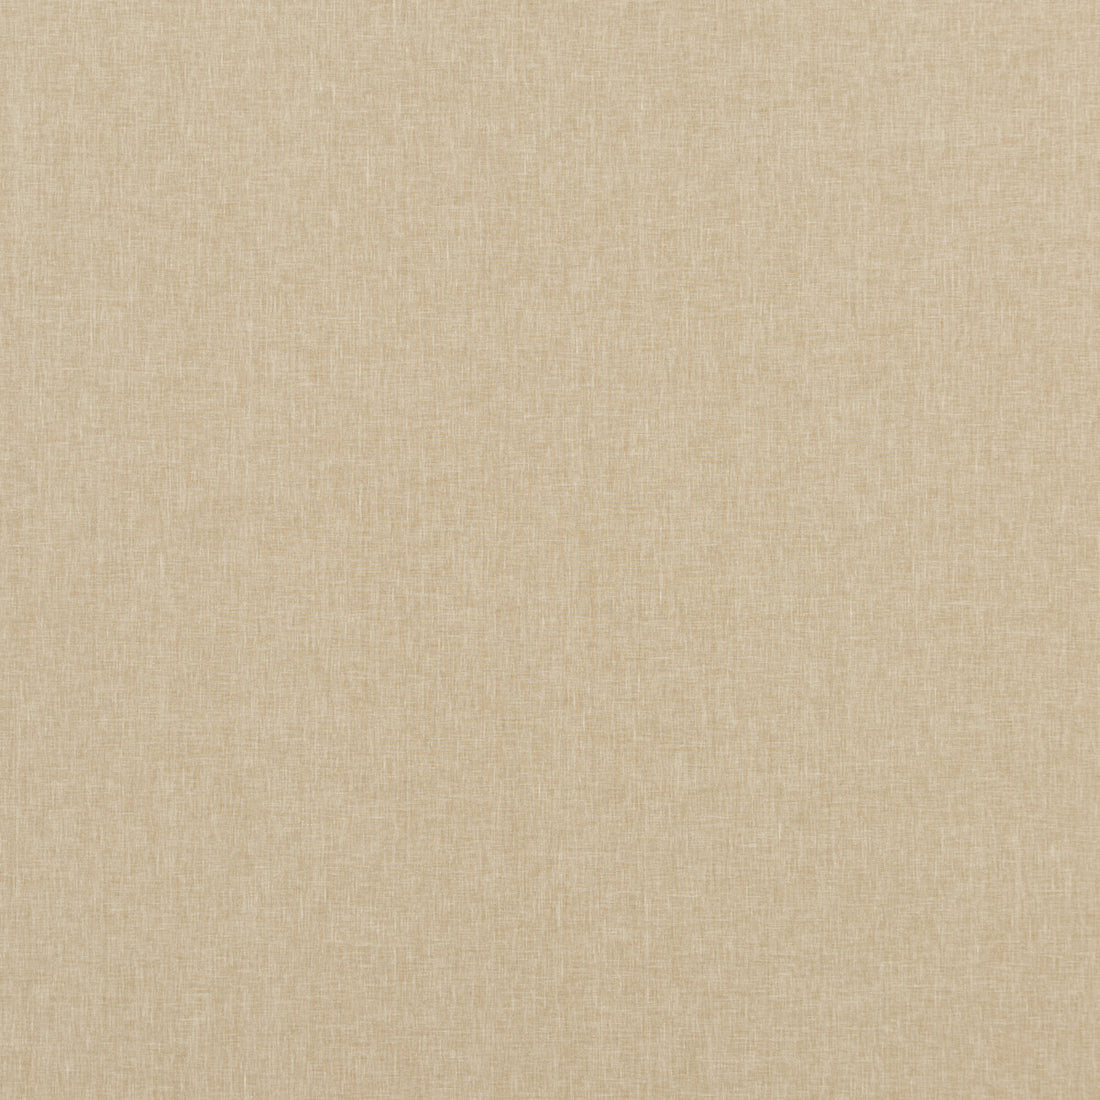 Carnival Plain fabric in sand color - pattern PF50420.130.0 - by Baker Lifestyle in the Carnival collection